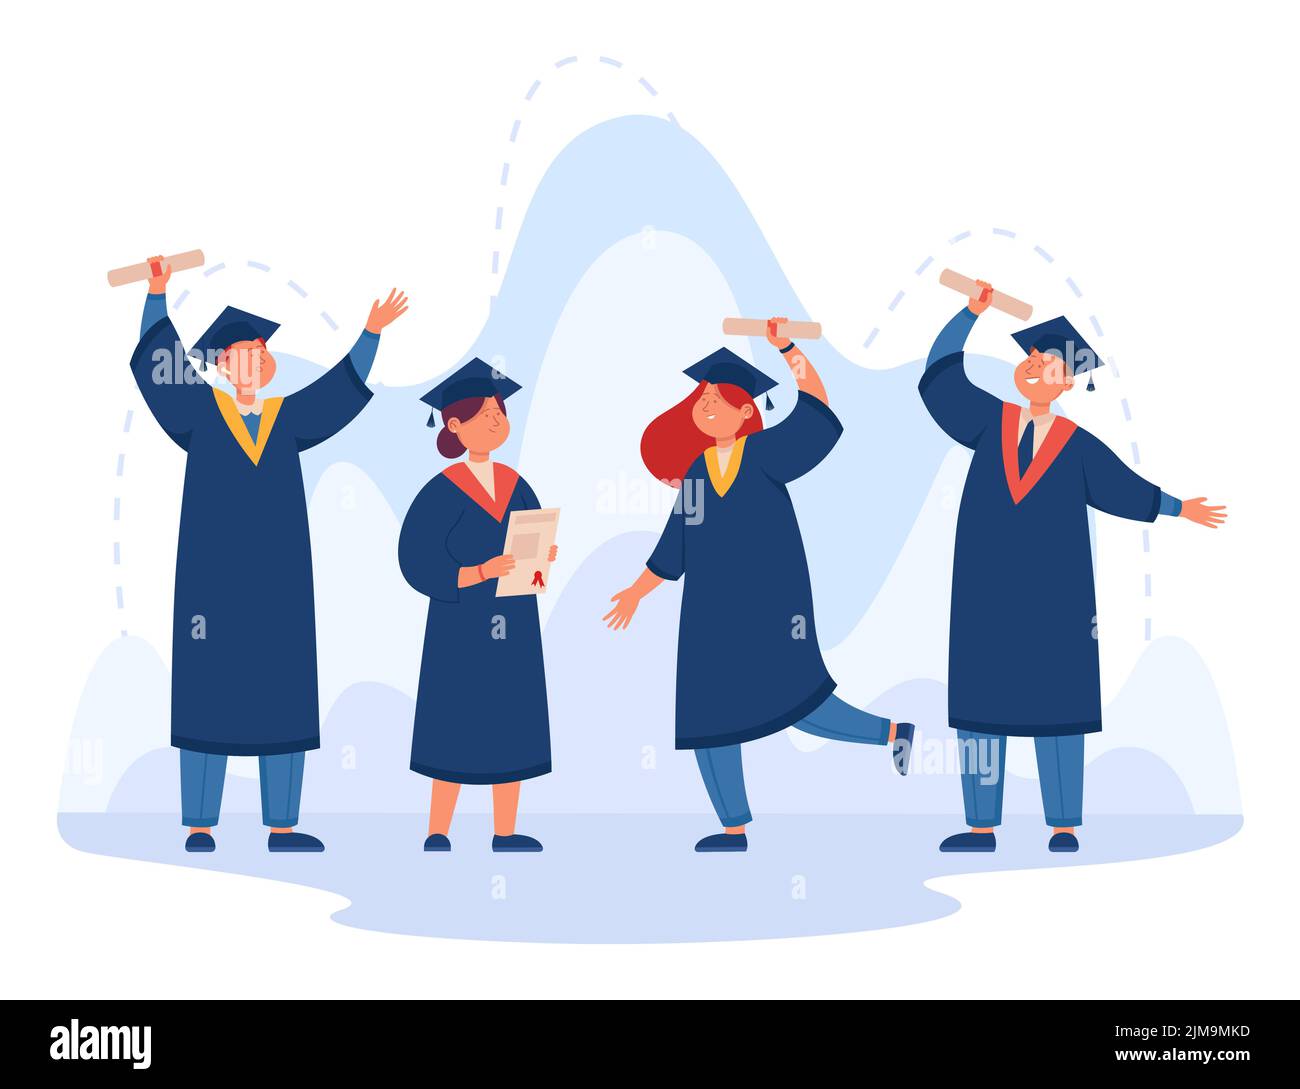 Happy cartoon college or university students holding diplomas. People getting degree, certificate, academic success flat vector illustration. Educatio Stock Vector